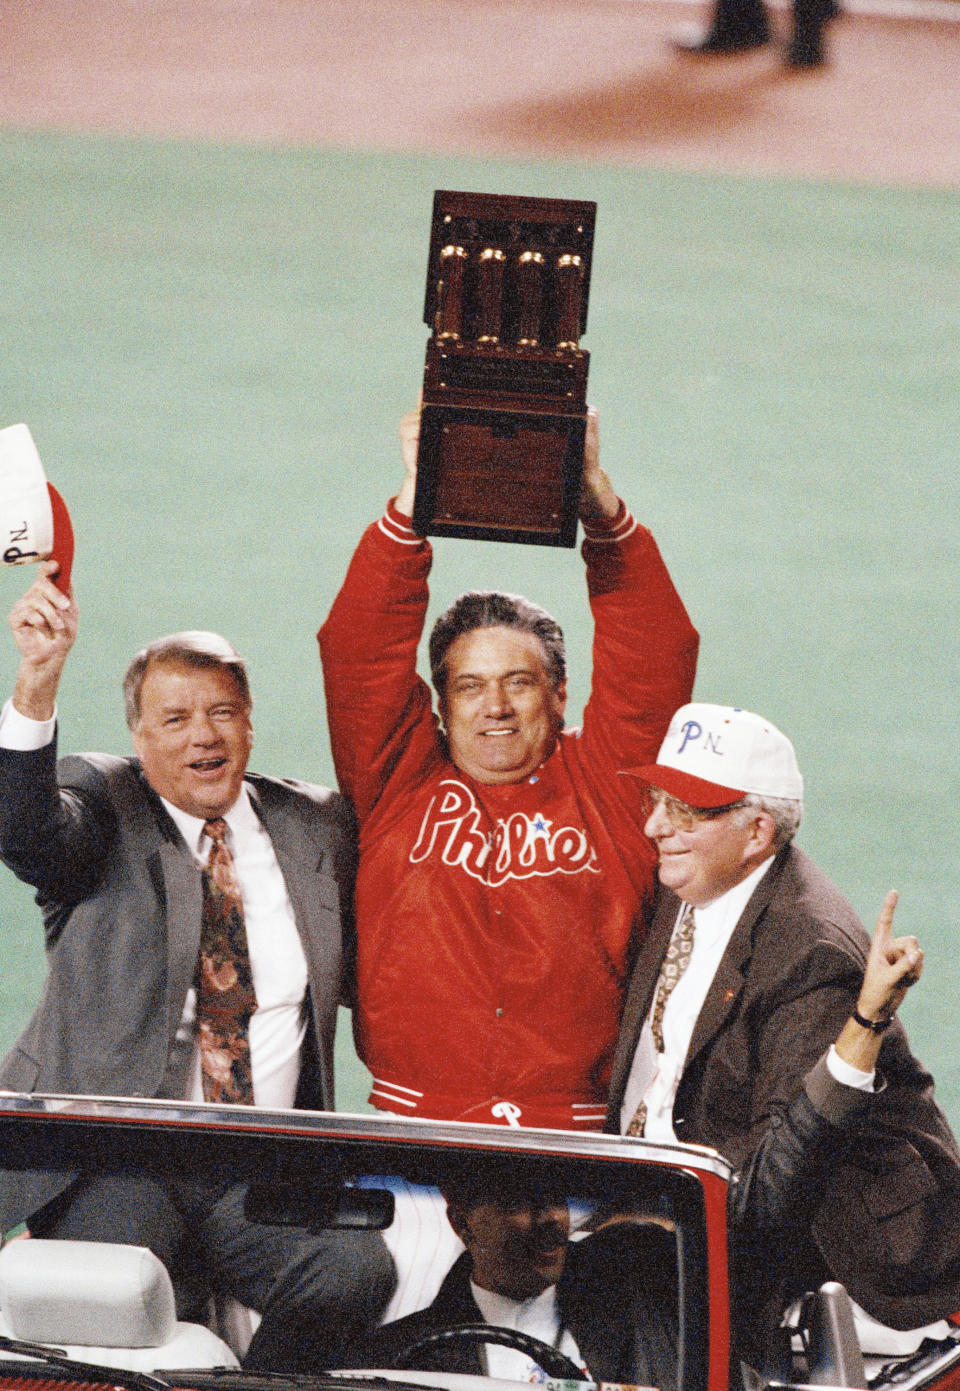 FILE - Philadelphia Phillies manager Jim Fregosi, center, holds up the NL Championship trophy as Phillies general manager Lee Thomas, left, and Phillies President Bill Giles look on during their drive around the field after the Phillies 6-3 win over the Atlanta Braves in Game 6 of the NL Playoffs, Oct. 14, 1993, Philadelphia, Pa. Lee Thomas, an All-Star player who eventually became the architect of the 1993 National League champion Philadelphia Phillies, has died. He was 86. Thomas died Wednesday, Aug. 31, 2022, at his home in St. Louis, the Phillies announced.(AP Photo/George Widman, File)